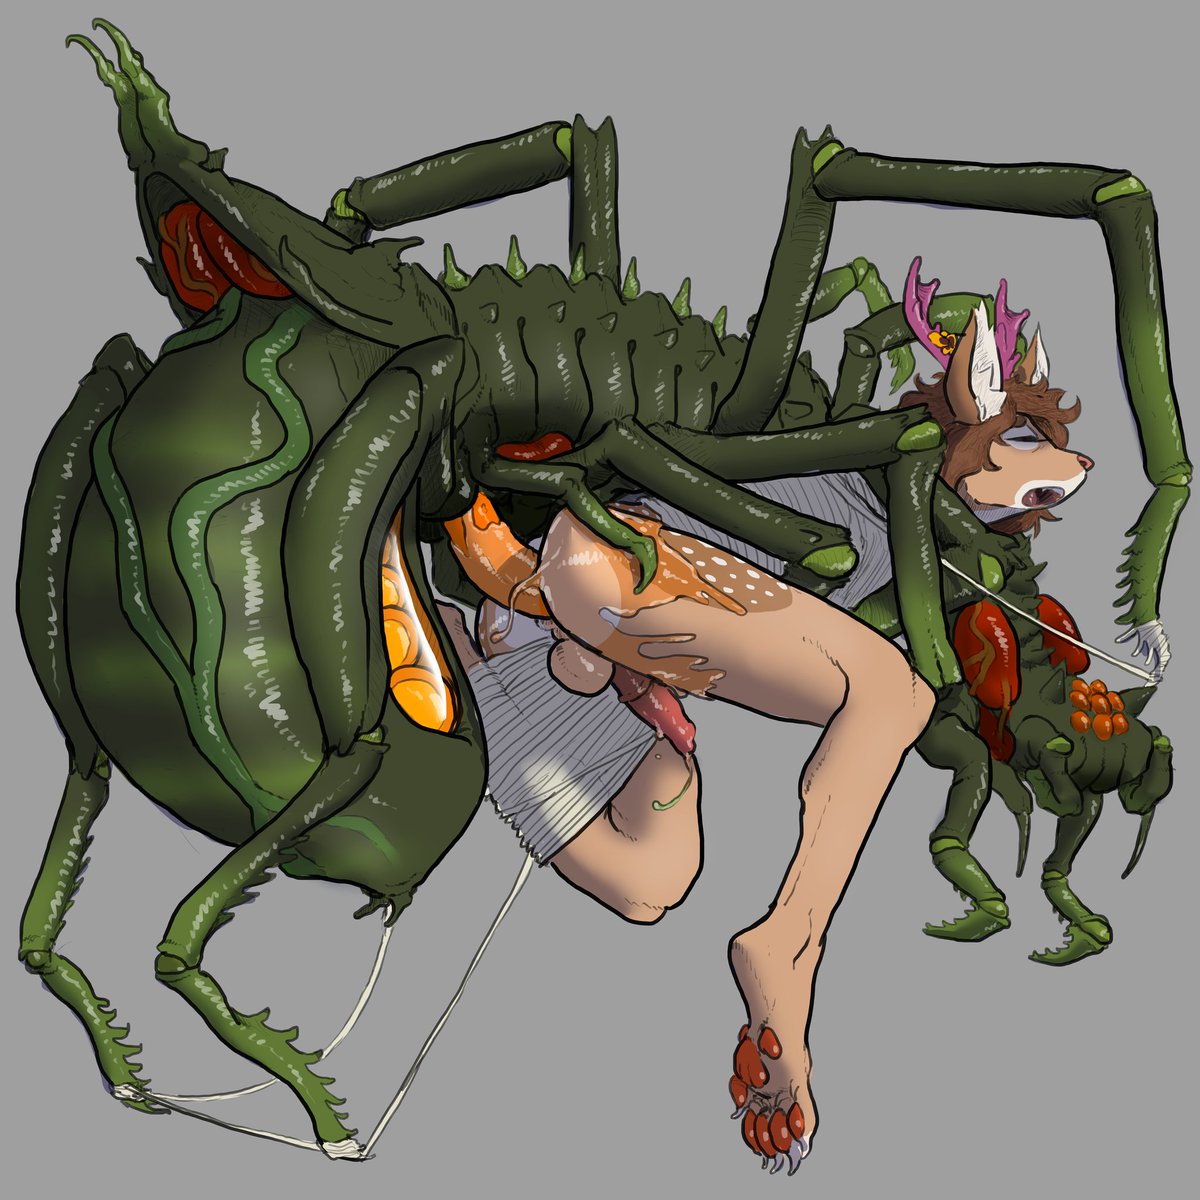 another ovipositor commission, this time by @TheKlayter ! 